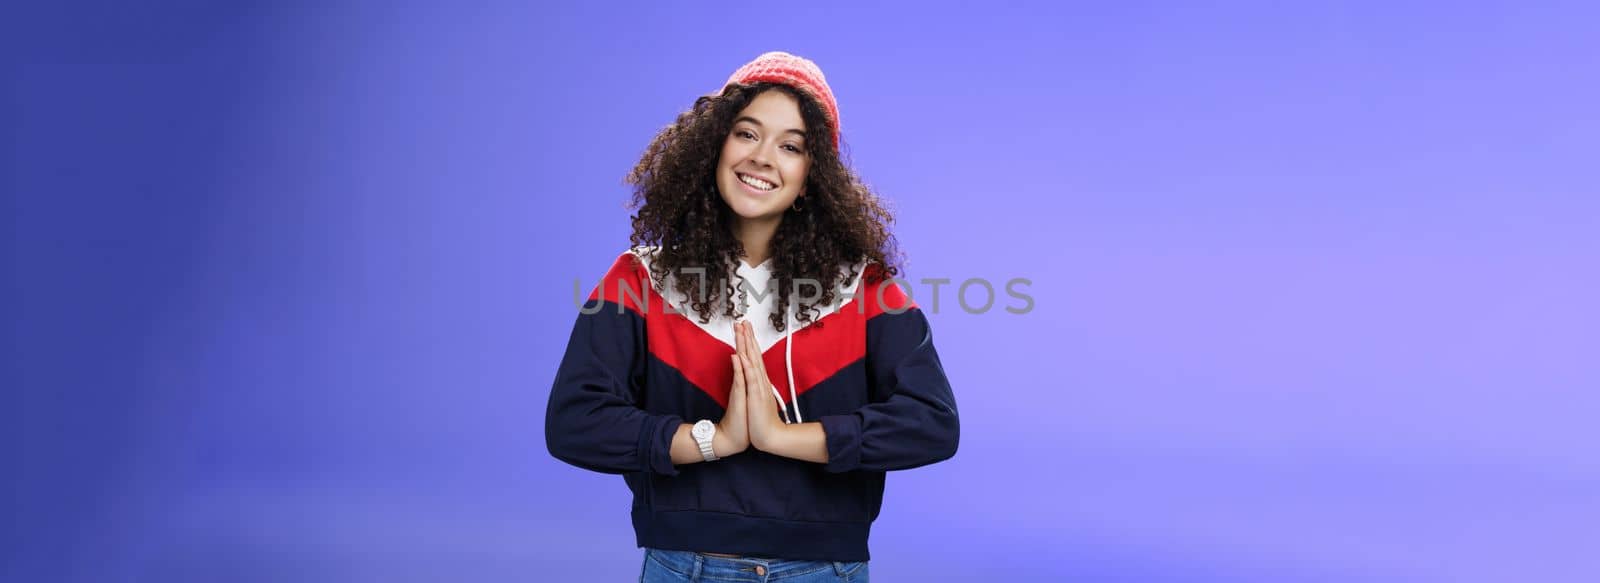 Portrait of charming curly-haired feminine girlfriend begging for favour as posing over blue background in winter outfit with hat, holding hands in pray smiling with angel look and friendly gaze. Body language and facial expressions concept